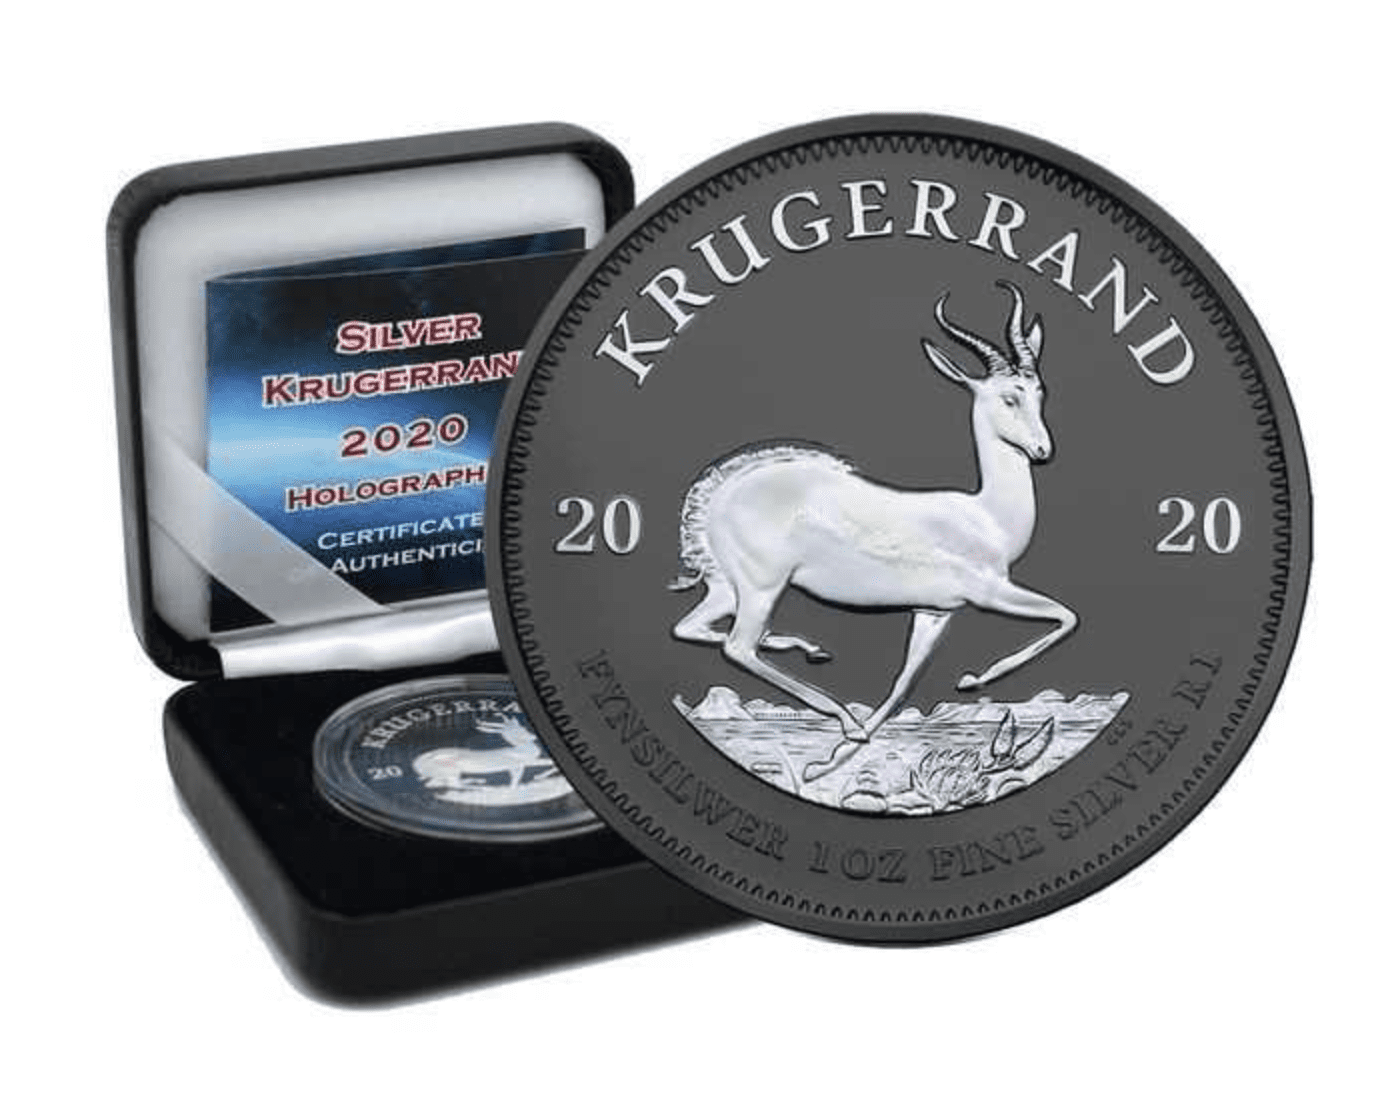 2020 Krugerrand Holographic Edition 1oz Silver & Ruthenium Coin - Overview